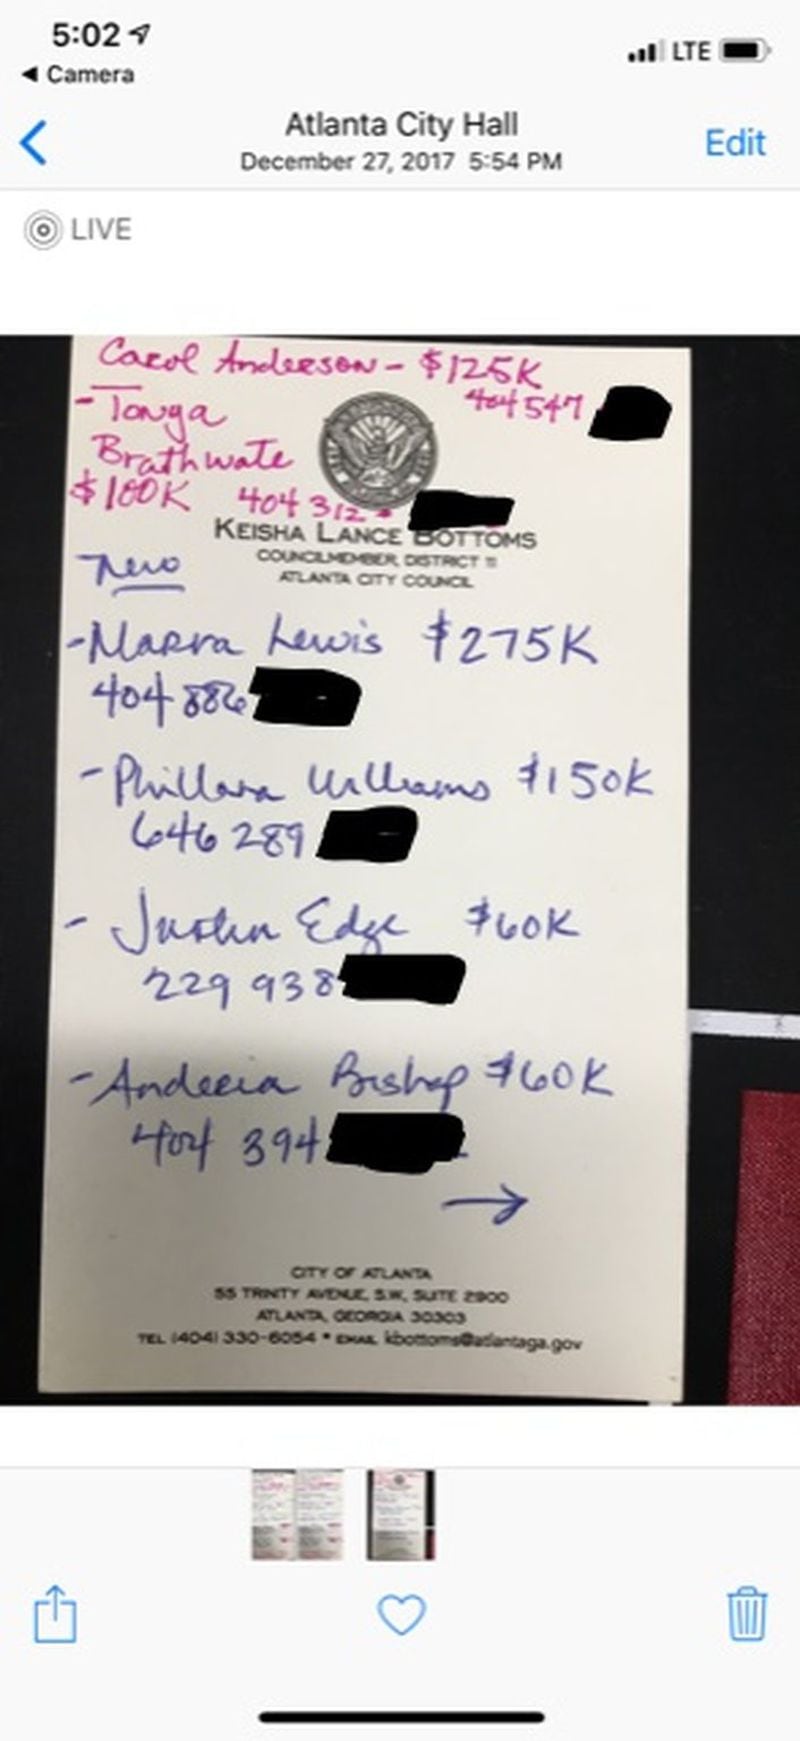 This note from December 2017 on Keisha Lance Bottoms’ City Council stationary shows a list of her key mayoral campaign workers with salary targets and phone numbers next to their names, according to former Atlanta Human Resources Commissioner Yvonne Yancy. Yancy said Bottoms asked her to get six campaign workers on the city payroll for transition work they did in December, but Yancy told her they couldn’t be put on the payroll until Bottoms took office in January. A Bottoms spokesperson disputes Yancy’s account. (The AJC redacted the phone numbers.) Source: Yvonne Yancy.